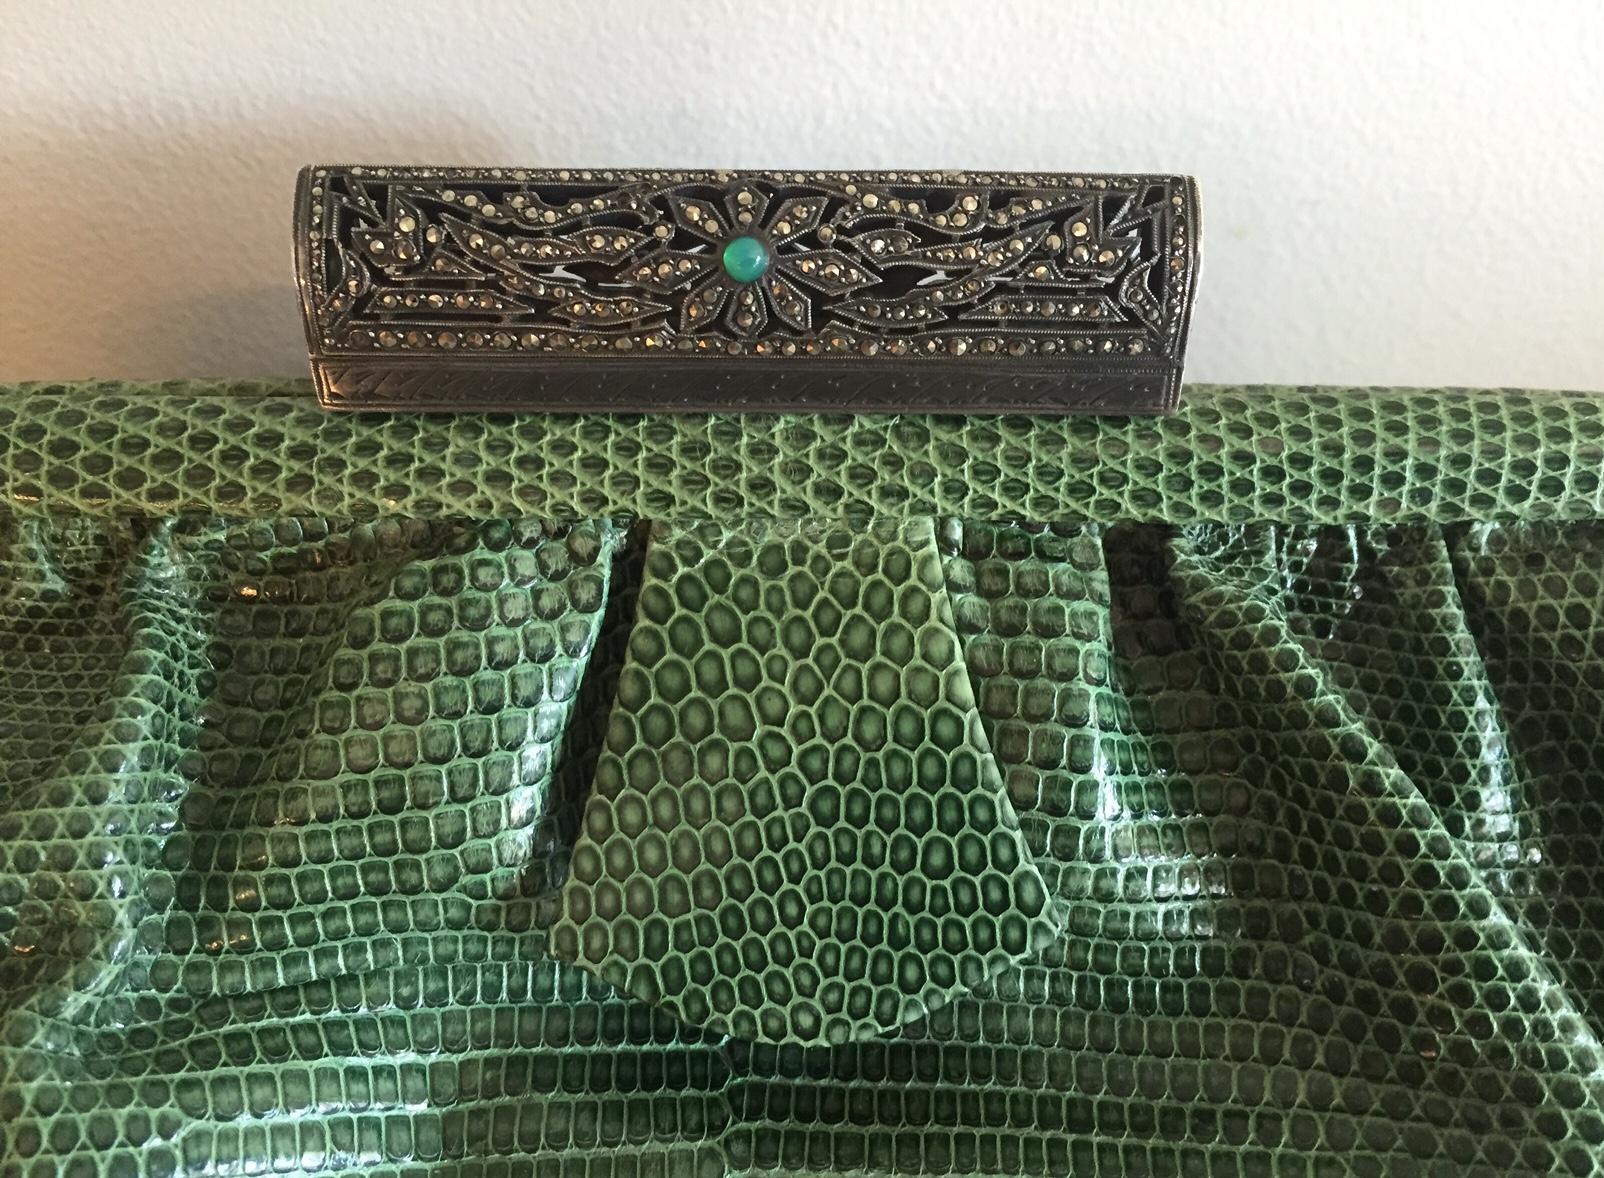 This 1930's Art Deco lizard clutch bag will add a pop of color to any outfit. It has a silver clasp [unmarked so I can't say that it is sterling but that would be my guess] studded with marcasite and a chrysoprase cabochon at the center. This is